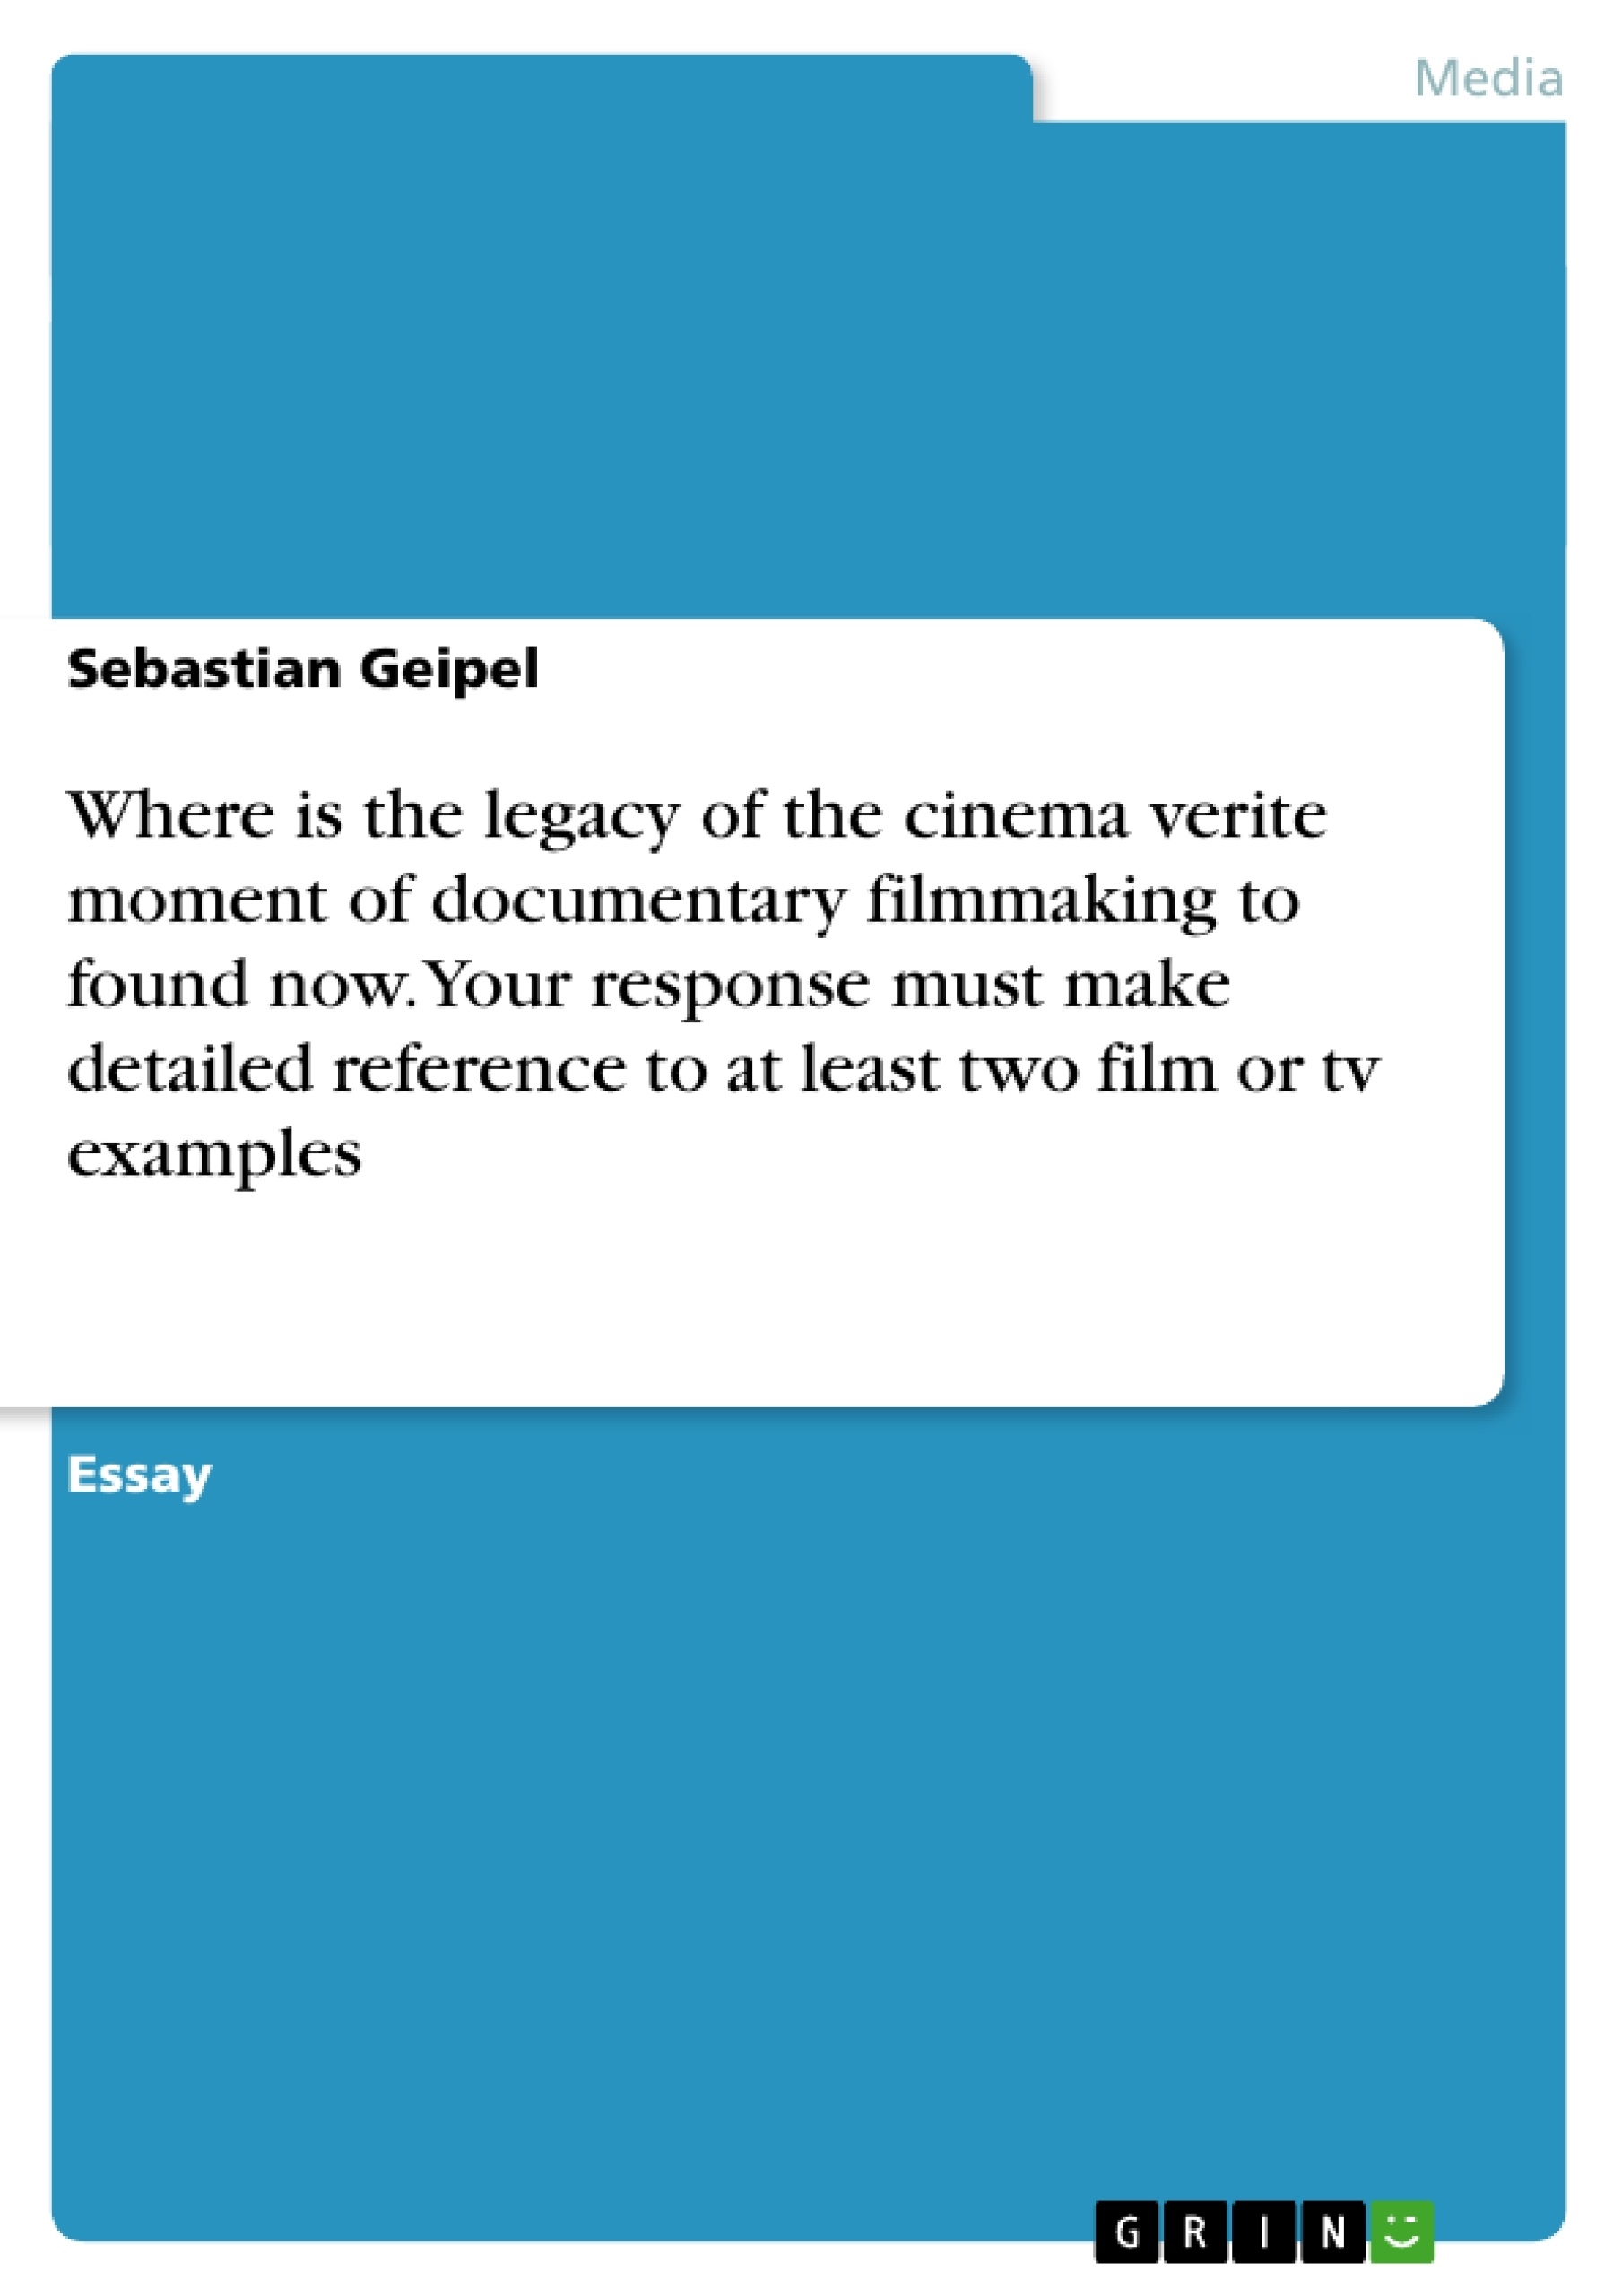 Titre: Where is the legacy of the cinema verite moment of documentary filmmaking to found now. Your response must make detailed reference to at least two film or tv examples